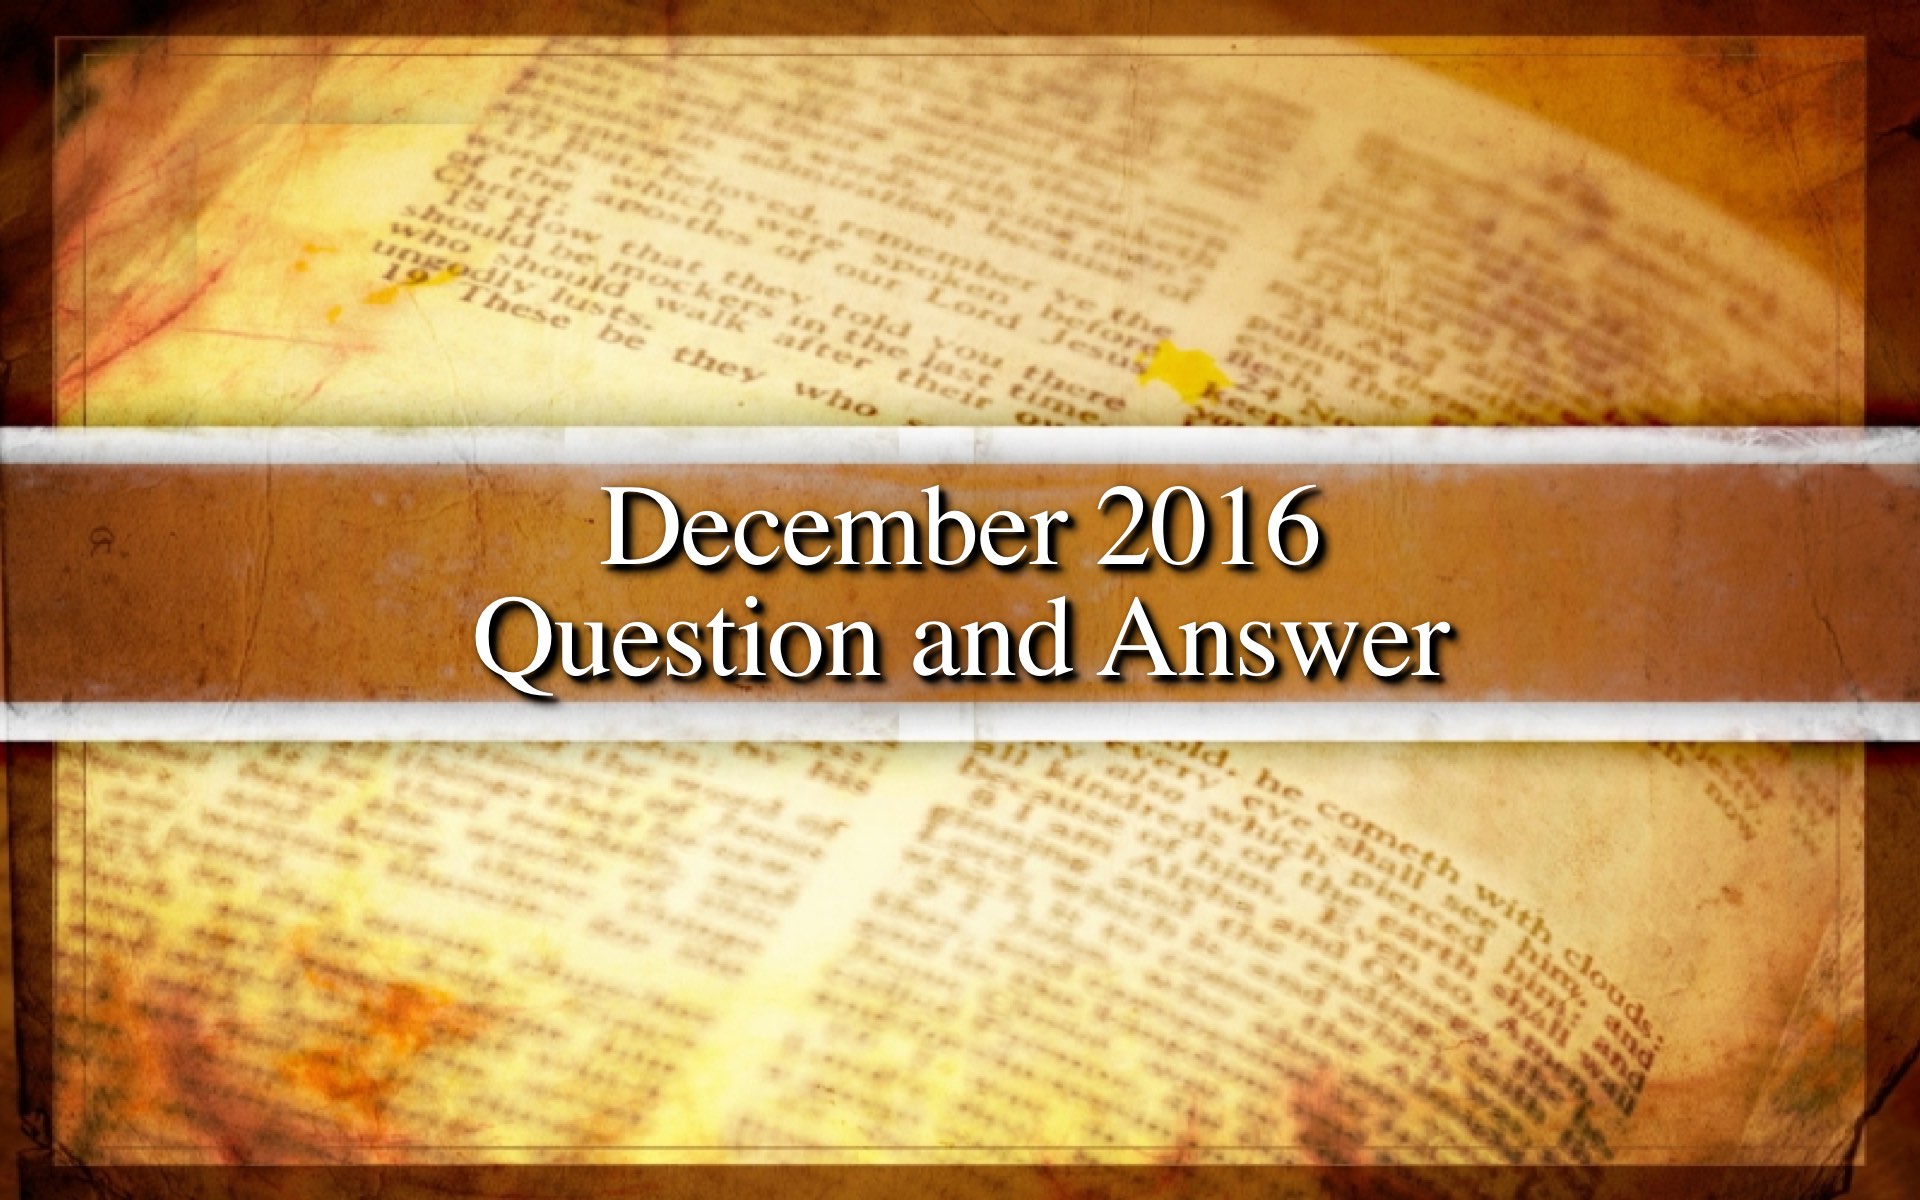 December 2016 Question and Answer